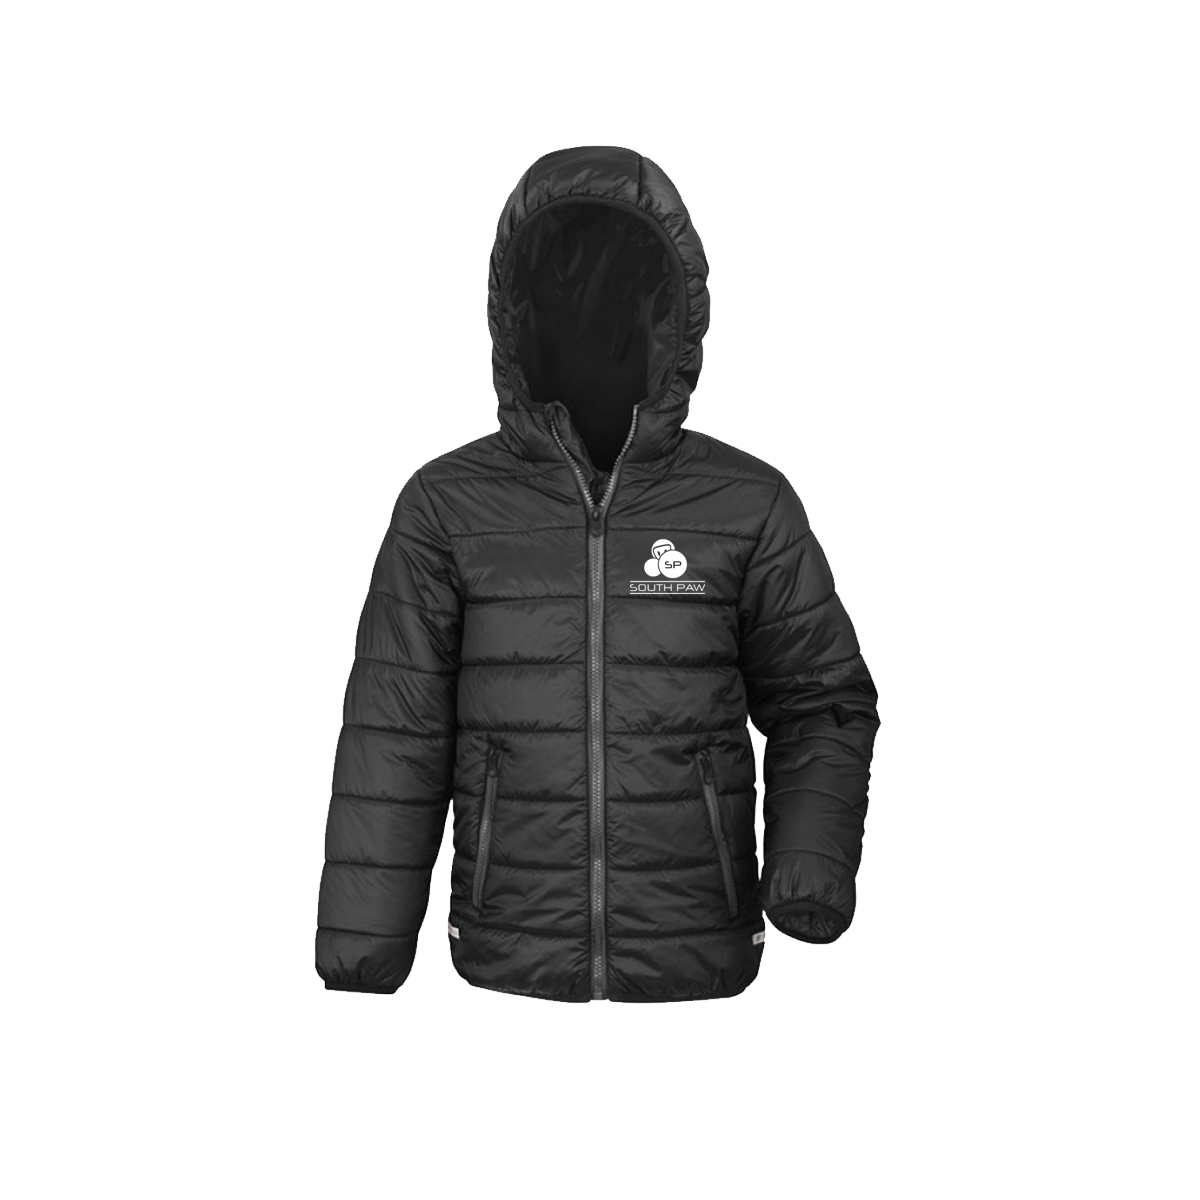 Official Southpaw Black Padded Jacket (Kids)